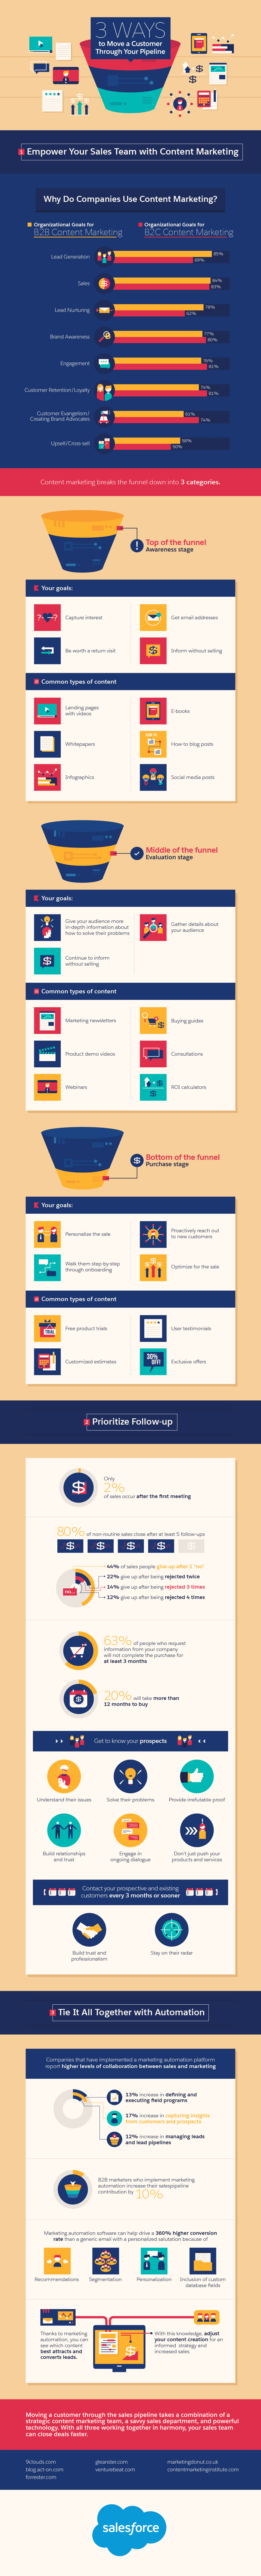 3 Ways to Move a Customer Through Your Pipeline [Infographic]